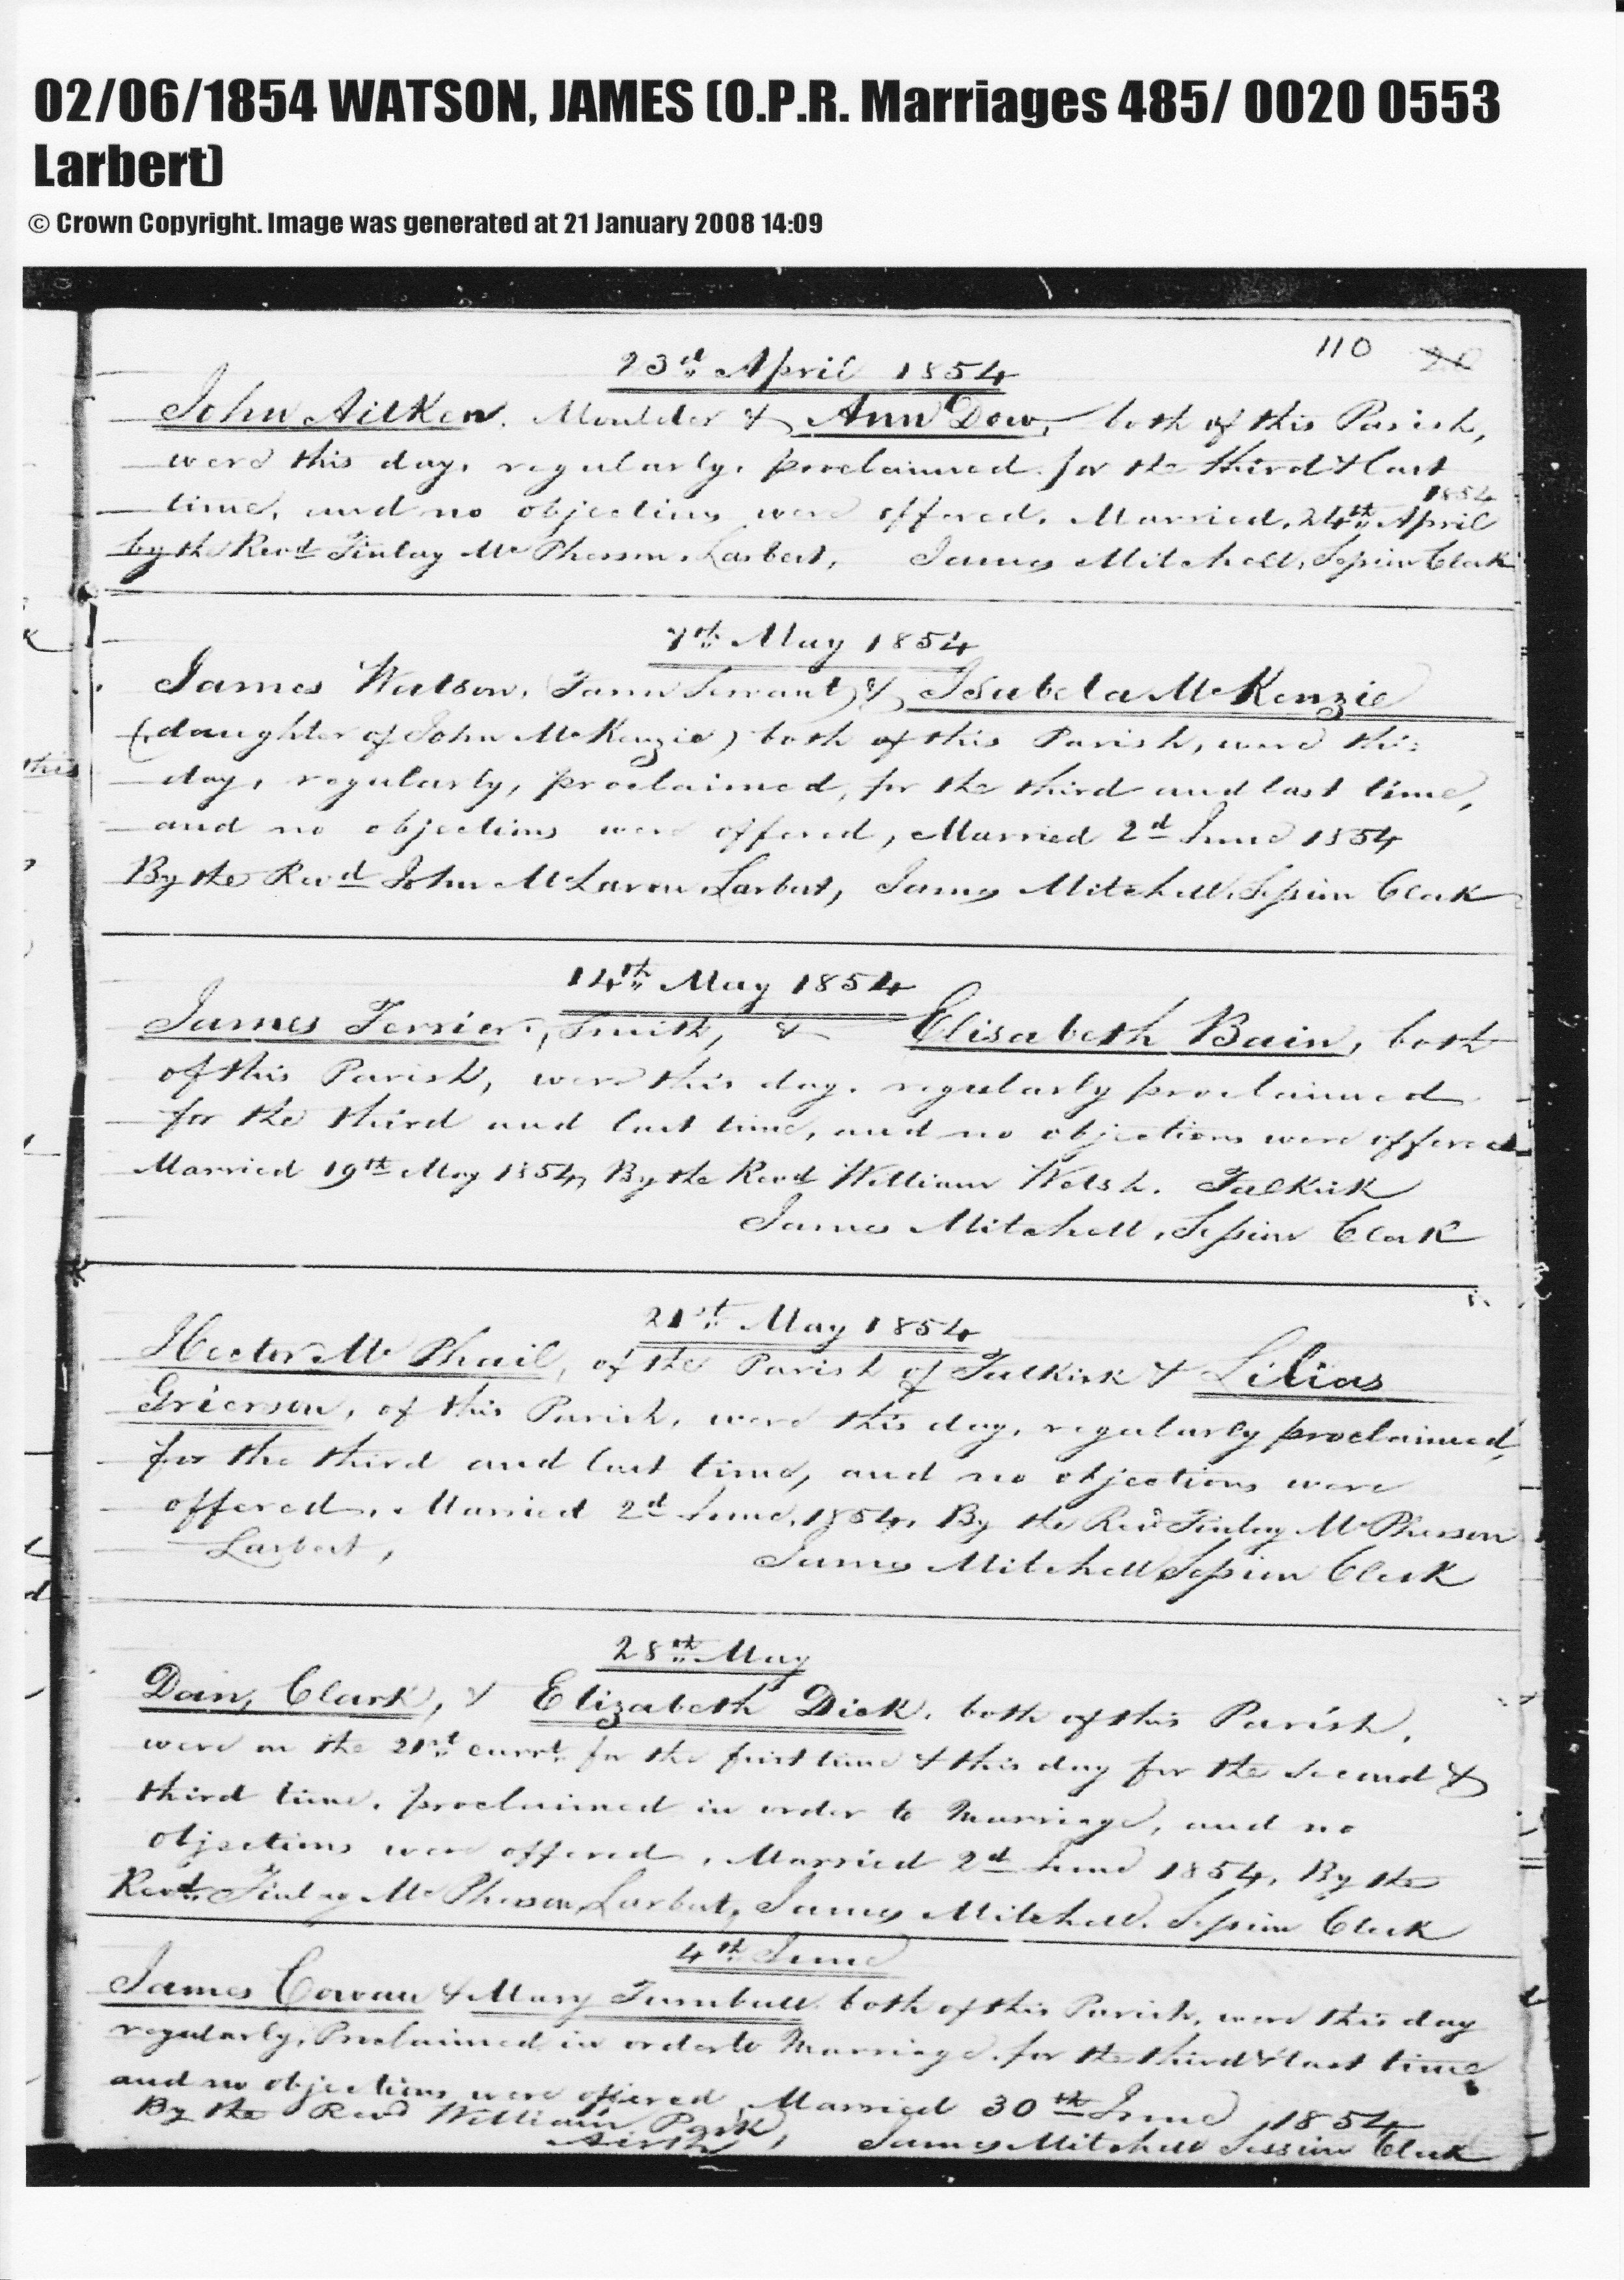 Marriage Register Entry 1854 James WATSON to Isabella McKENZIE, June 2, 1854, Linked To: <a href='i931.html' >James Watson</a> and <a href='i335.html' >Isabela McKenzie</a>